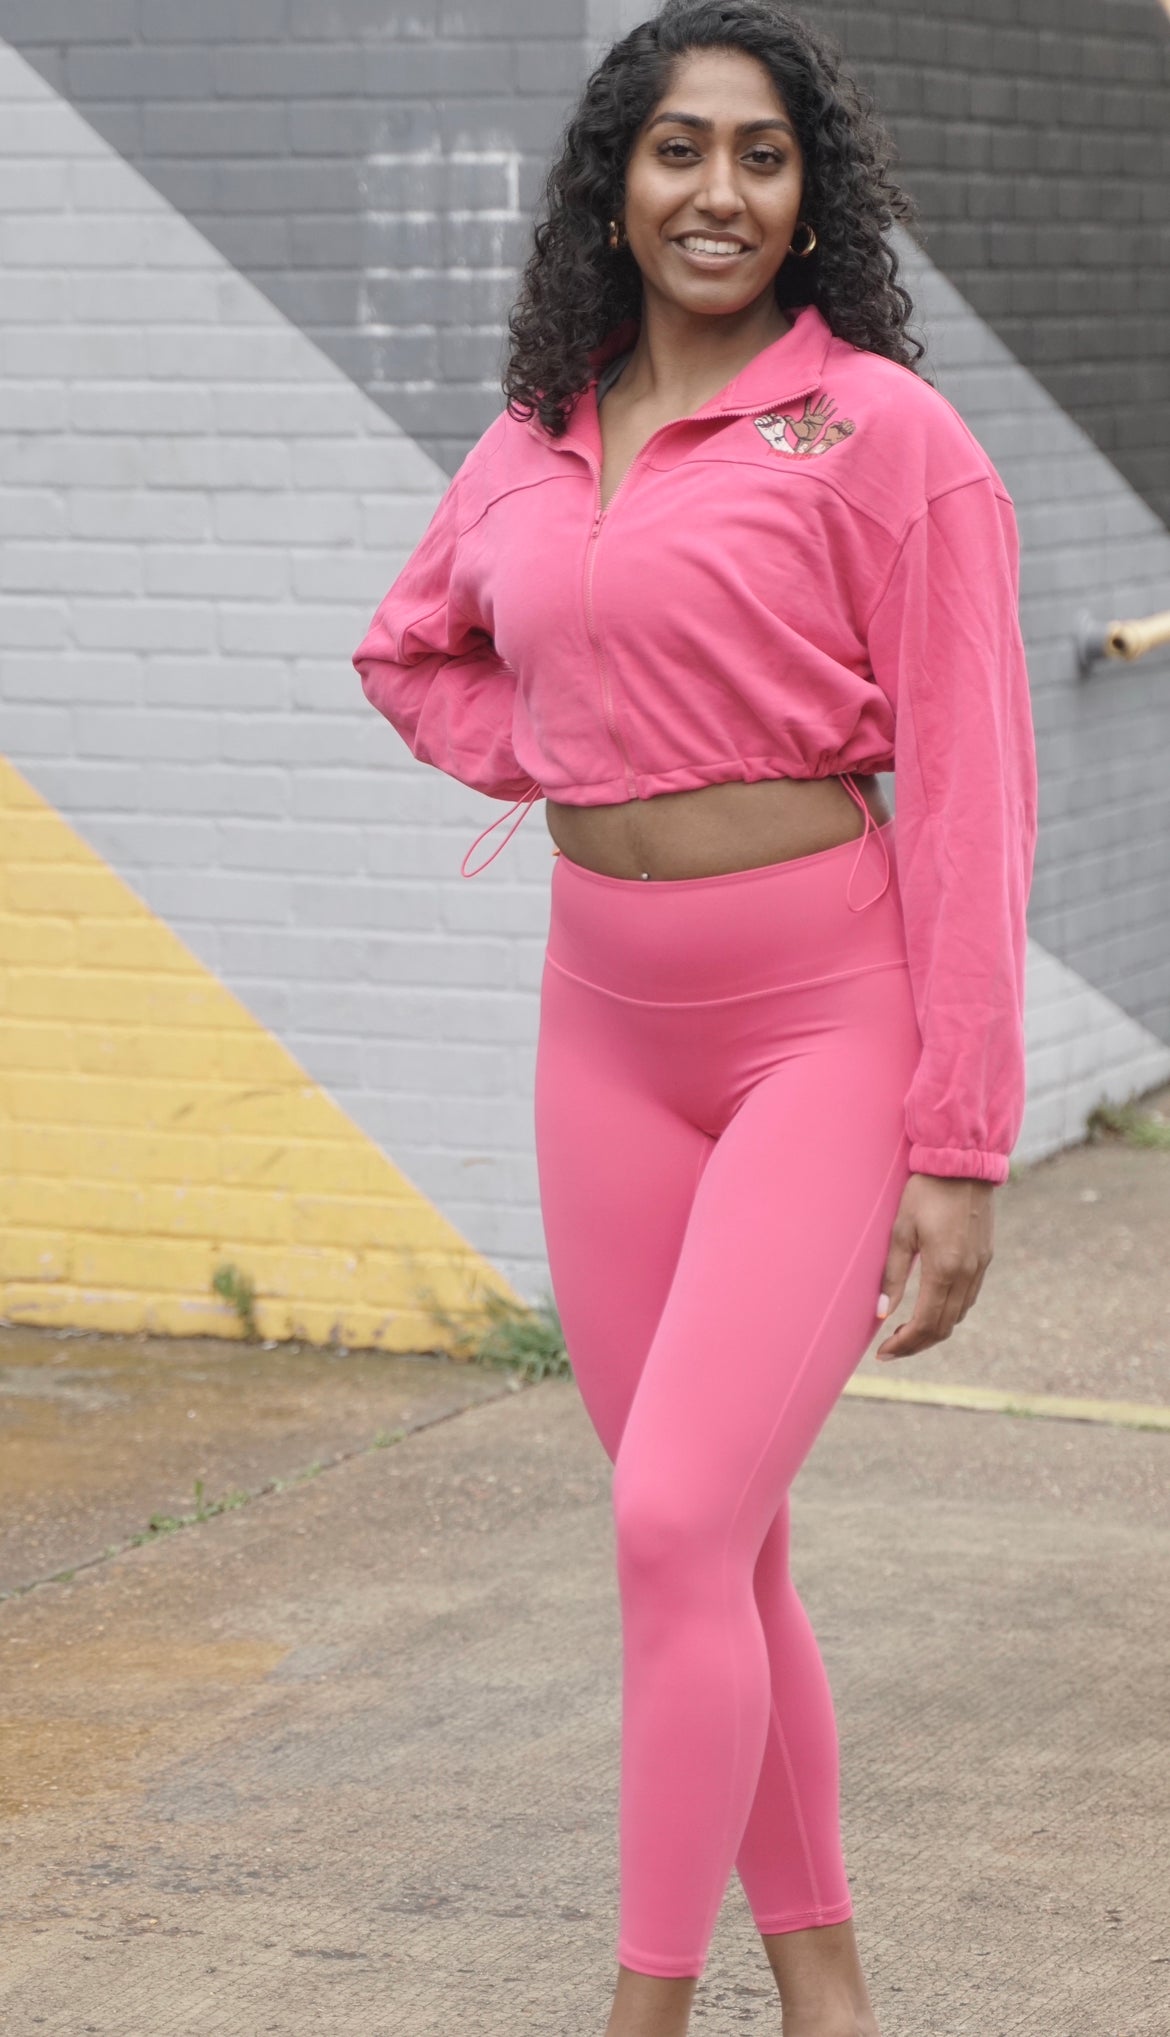 POWERfitwithT: Royal blue and Hot pink Crop jumper